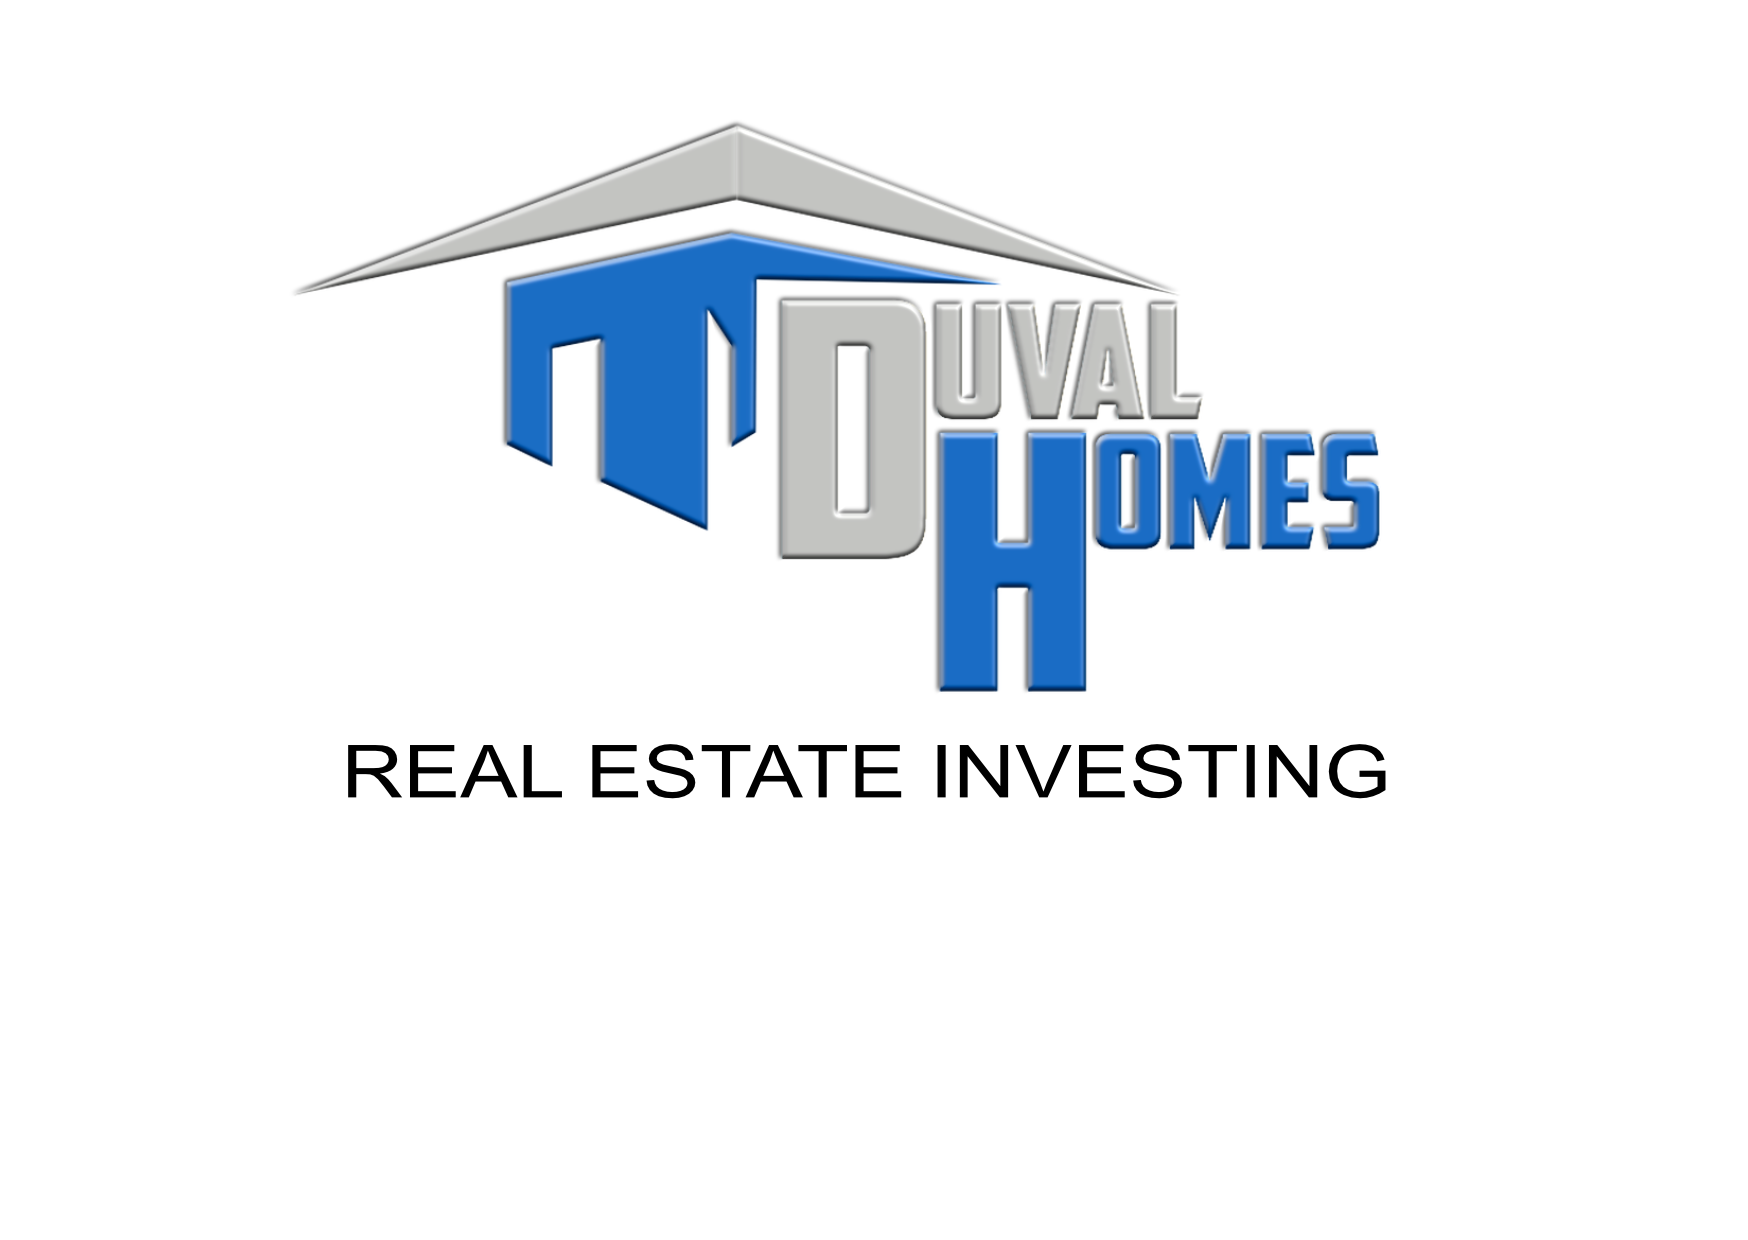 Duval Homes Real Estate